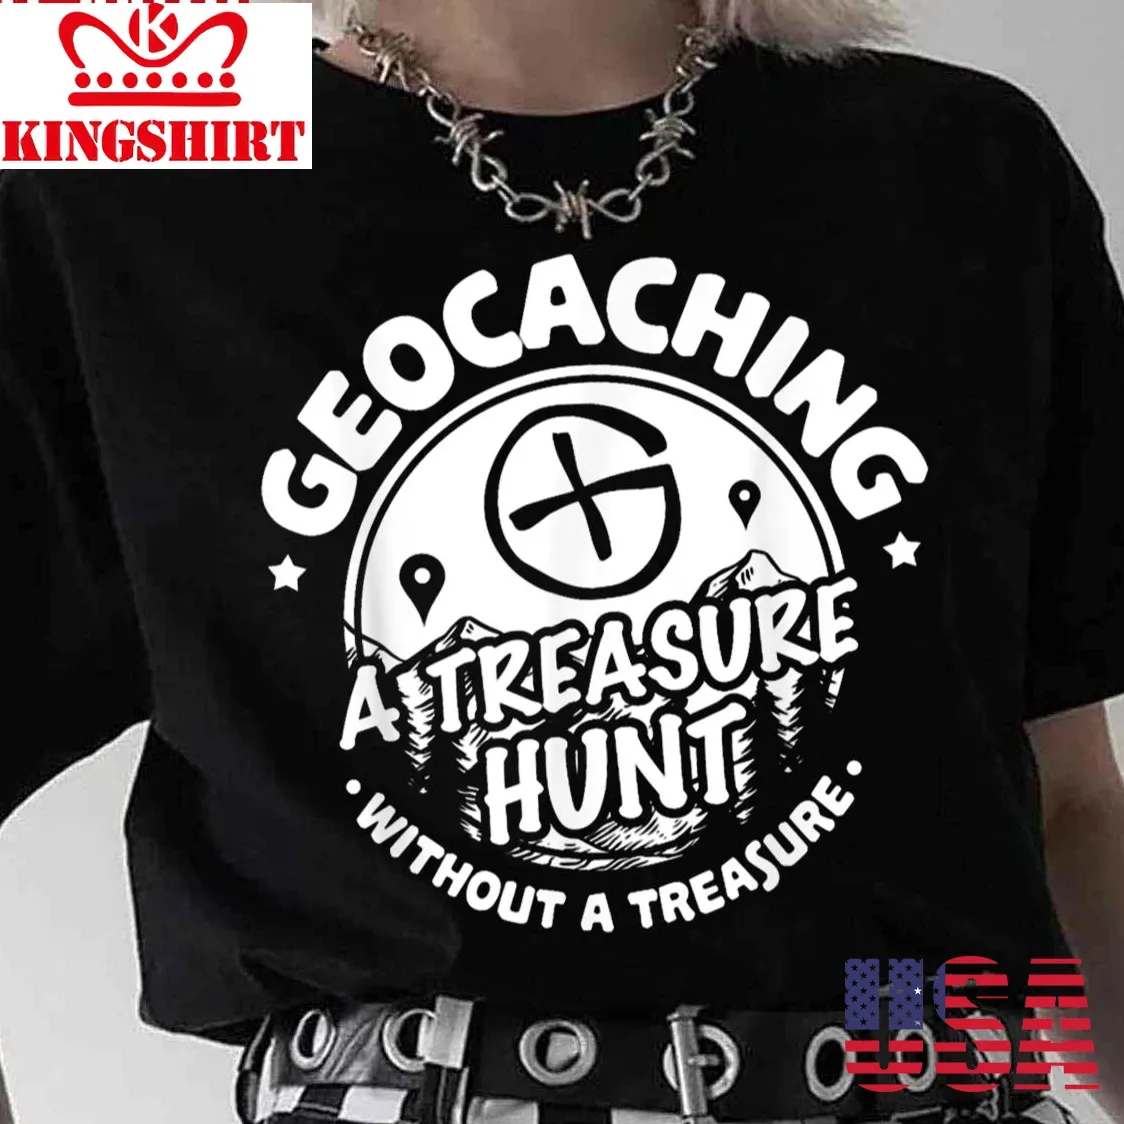 Geocacher A Treasure Hunt Without A Treasure Geocaching Unisex T Shirt